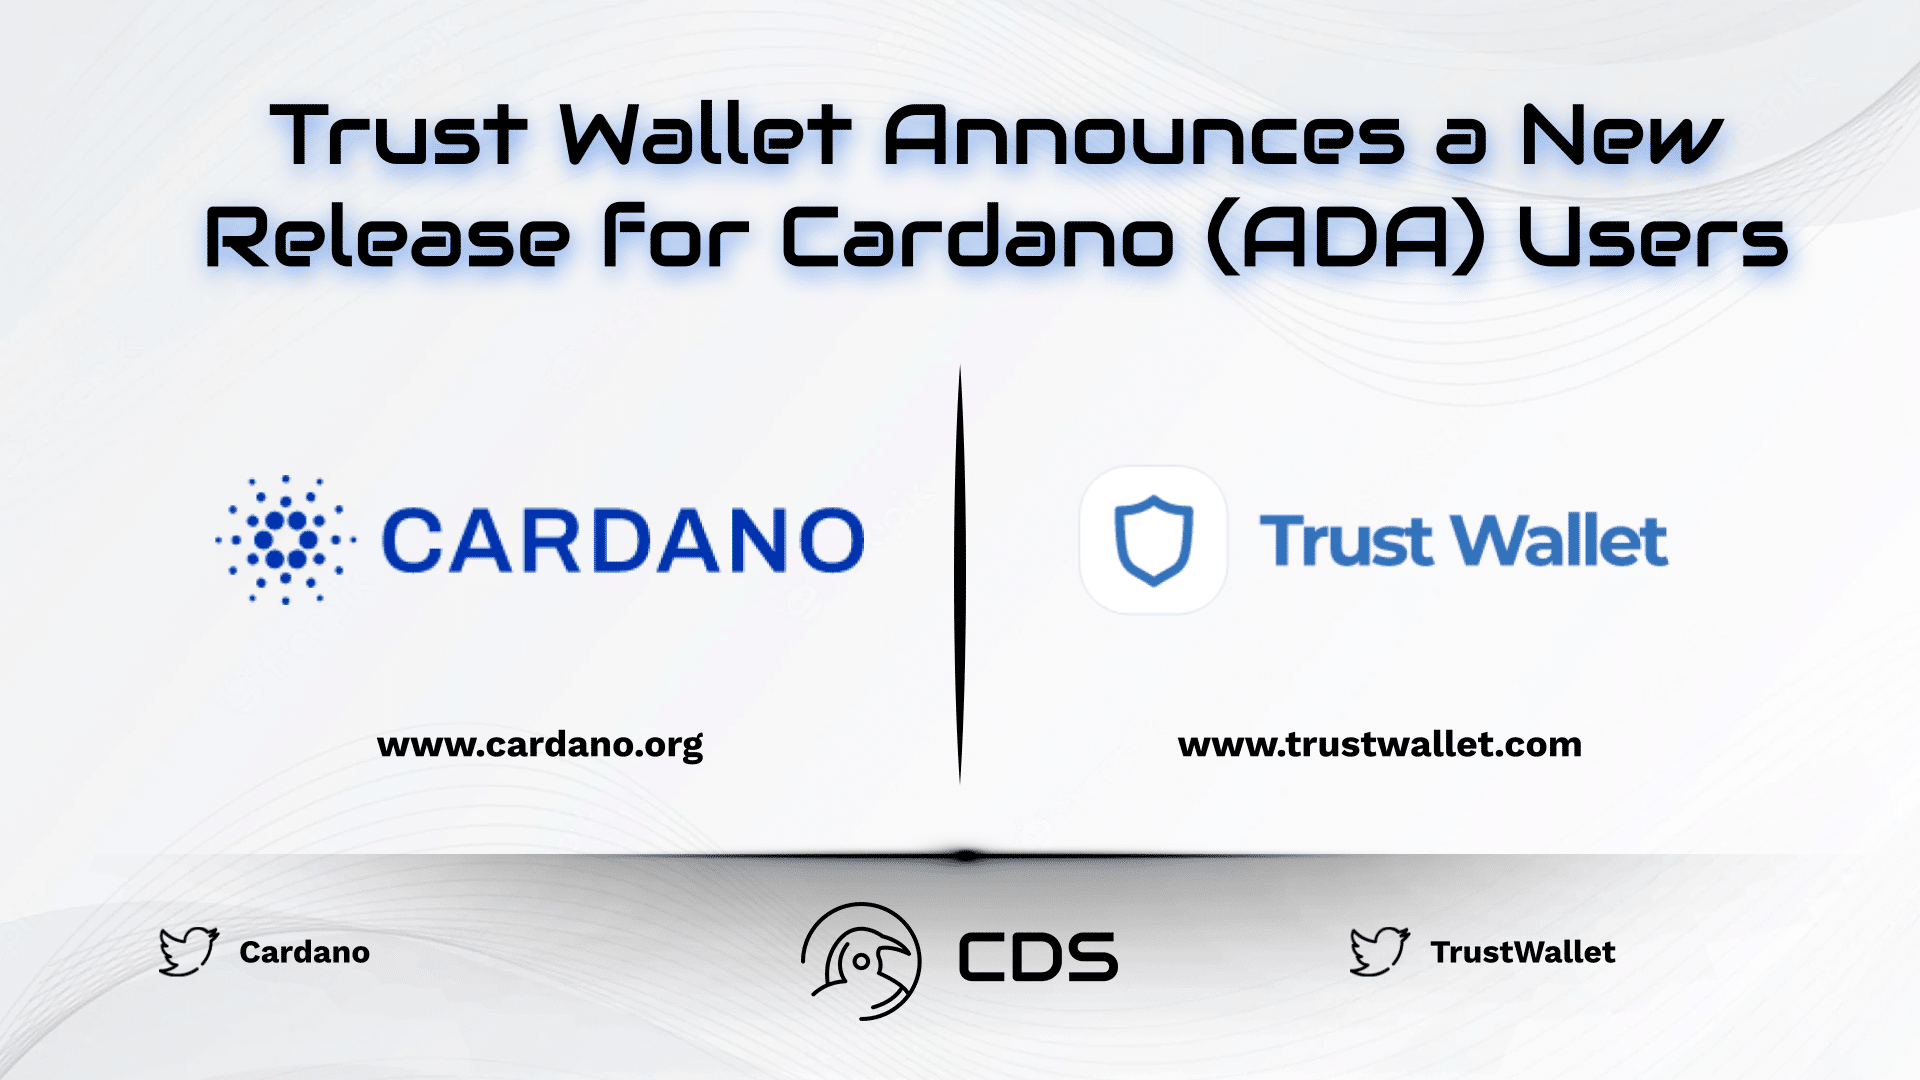 Trust Wallet Announces a New Release for Cardano (ADA) Users